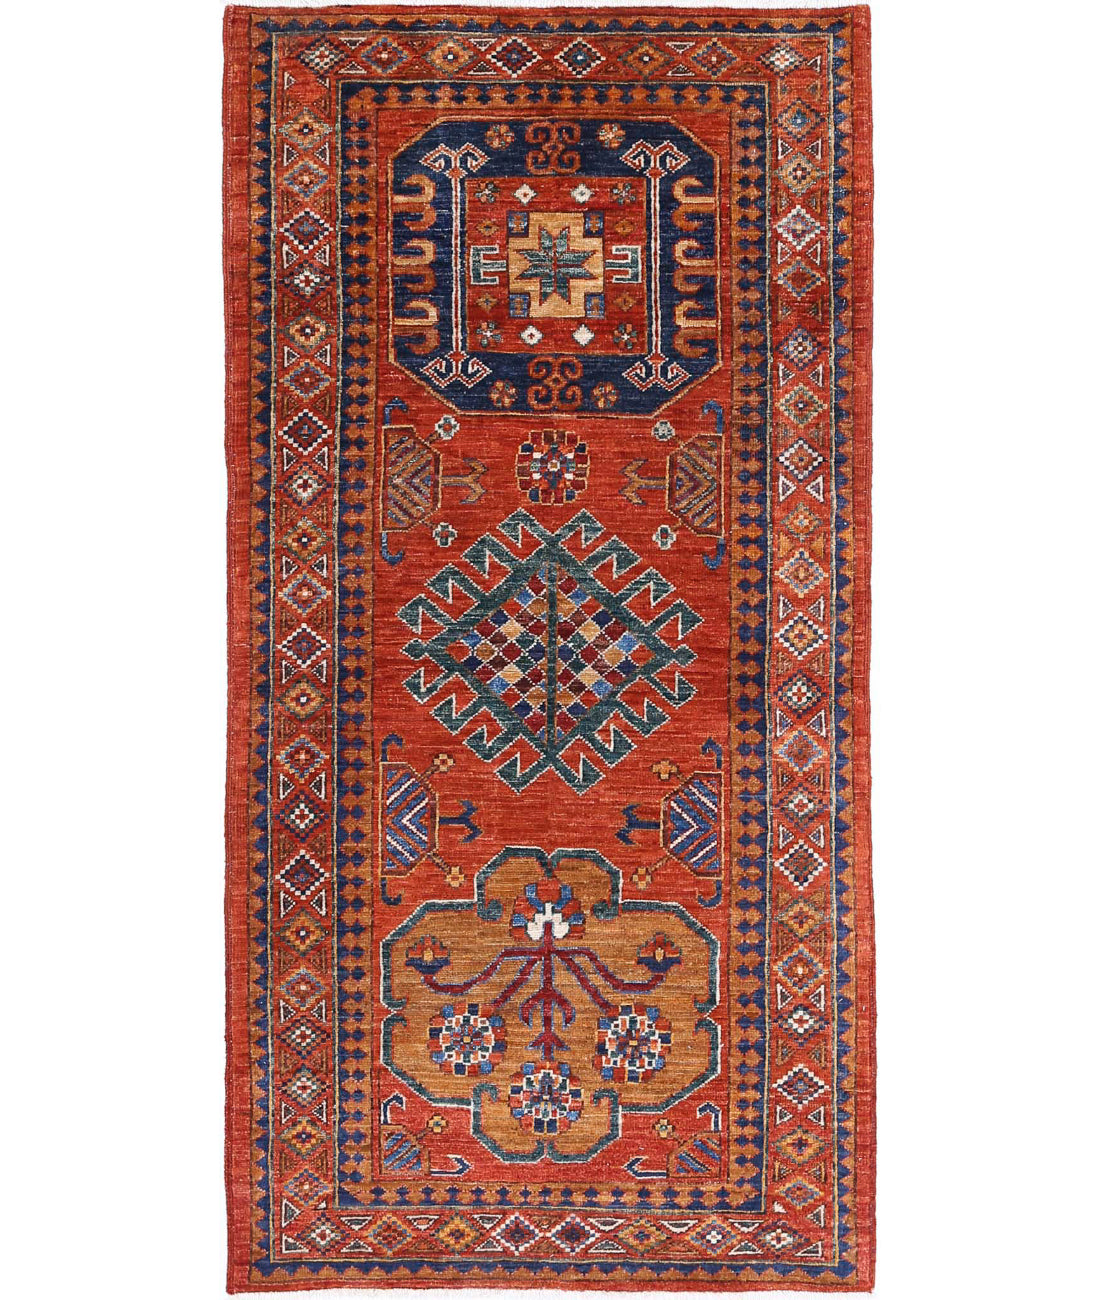 Hand Knotted Nomadic Caucasian Humna Wool Rug - 2&#39;8&#39;&#39; x 5&#39;9&#39;&#39; 2&#39;8&#39;&#39; x 5&#39;9&#39;&#39; (80 X 173) / Rust / Gold